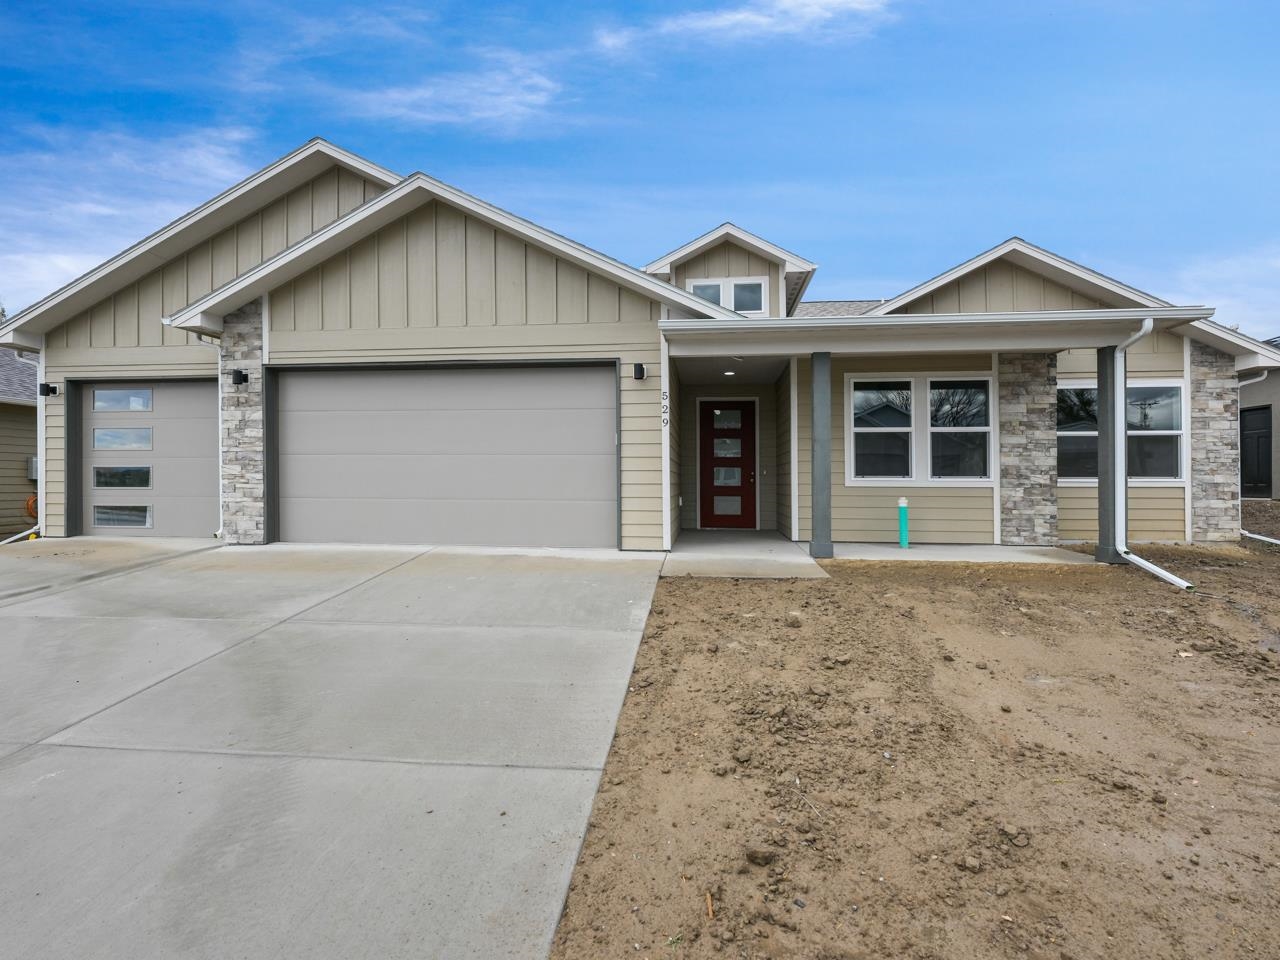 Welcome to the Desert Peach Subdivision, a beautiful collection of 2022 new construction homes in Clifton, CO.  Quality construction by local North Peak Construction, and located near farms, orchards, and wineries. In fact, you can jump on the famous Fruit and Wine Byway just 1/2 mile from this home, and ride, walk, or drive around Palisade and East Orchard Mesa's amazing orchards and vineyards. High end and on-trend finishes throughout the home including quartz counters, 9' ceilings, kitchen islands, modern designs and lighting, and open concept living spaces. Just moments away from Grand Junction, Palisade, and all the adventure the Grand Valley has to offer, this new neighborhood has something for everyone. Reach out to ask about what homes are available today!